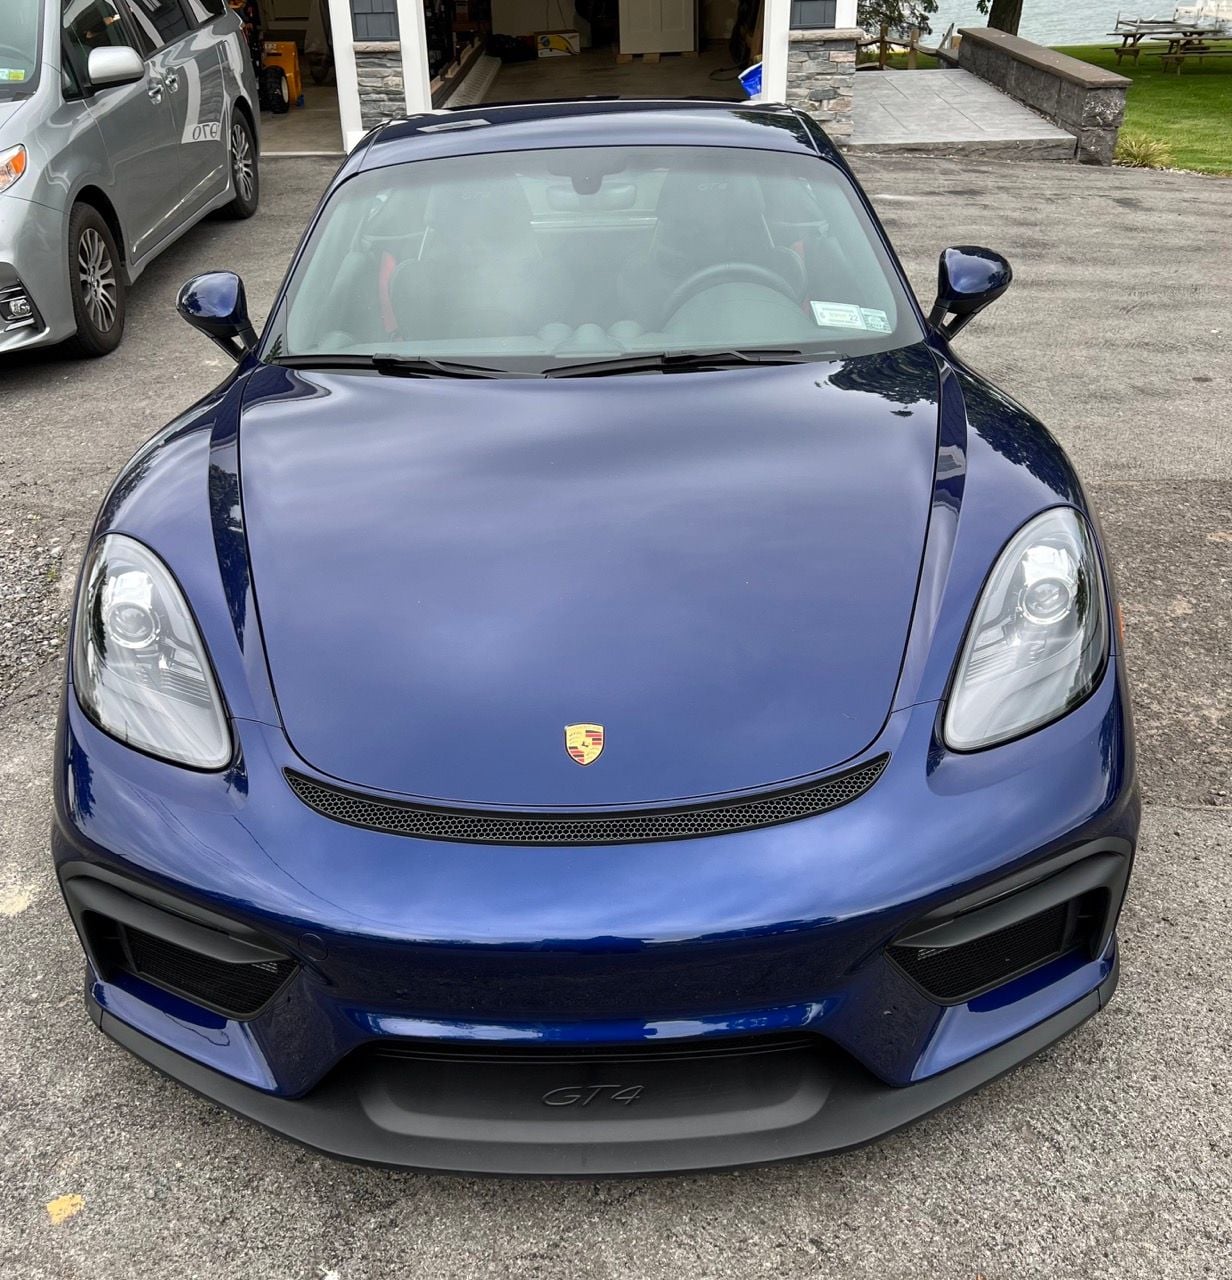 2020 Porsche 718 Cayman - Pristine Very low mileage one owner 2020 GT4 - Used - VIN WP0AC2A87LK289513 - 800 Miles - 6 cyl - 2WD - Manual - Coupe - Blue - Canandaigua, NY 14424, United States